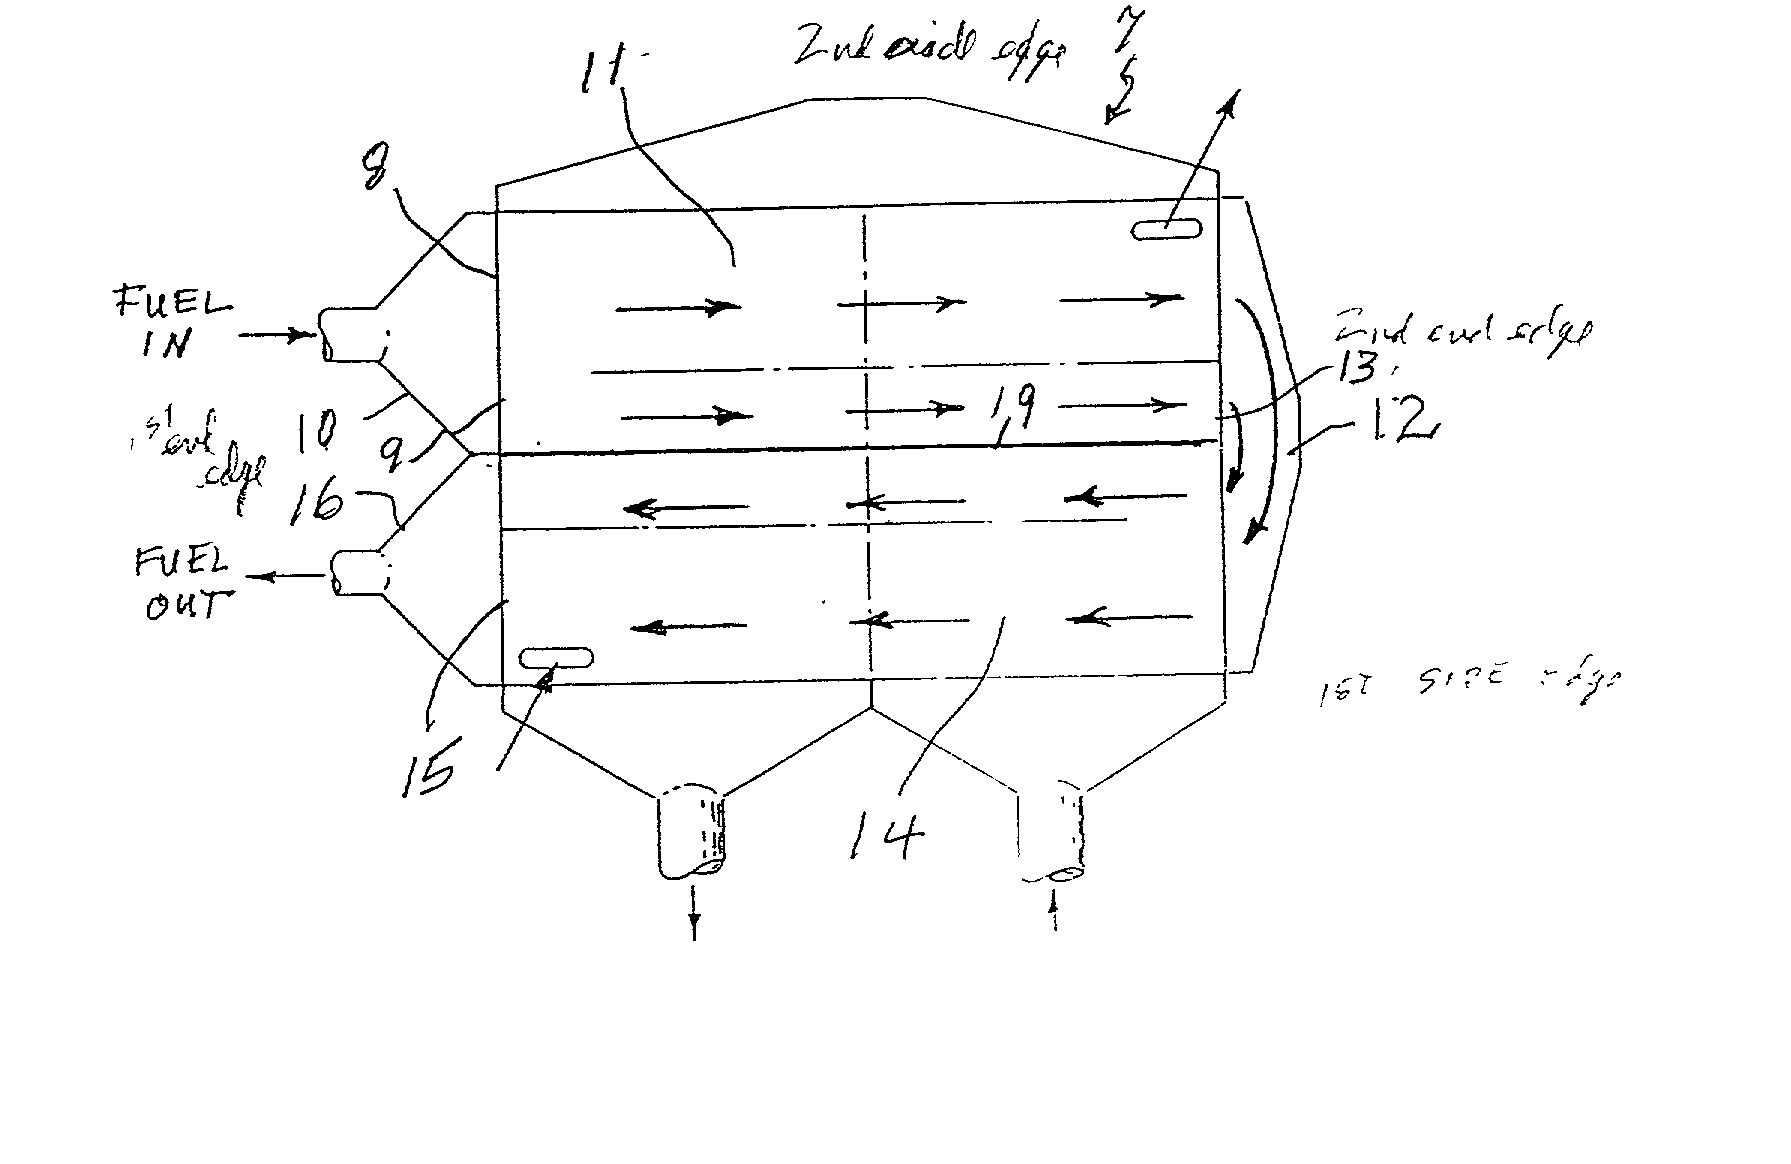 Fluid flow control for cool, efficient fuel cell operation